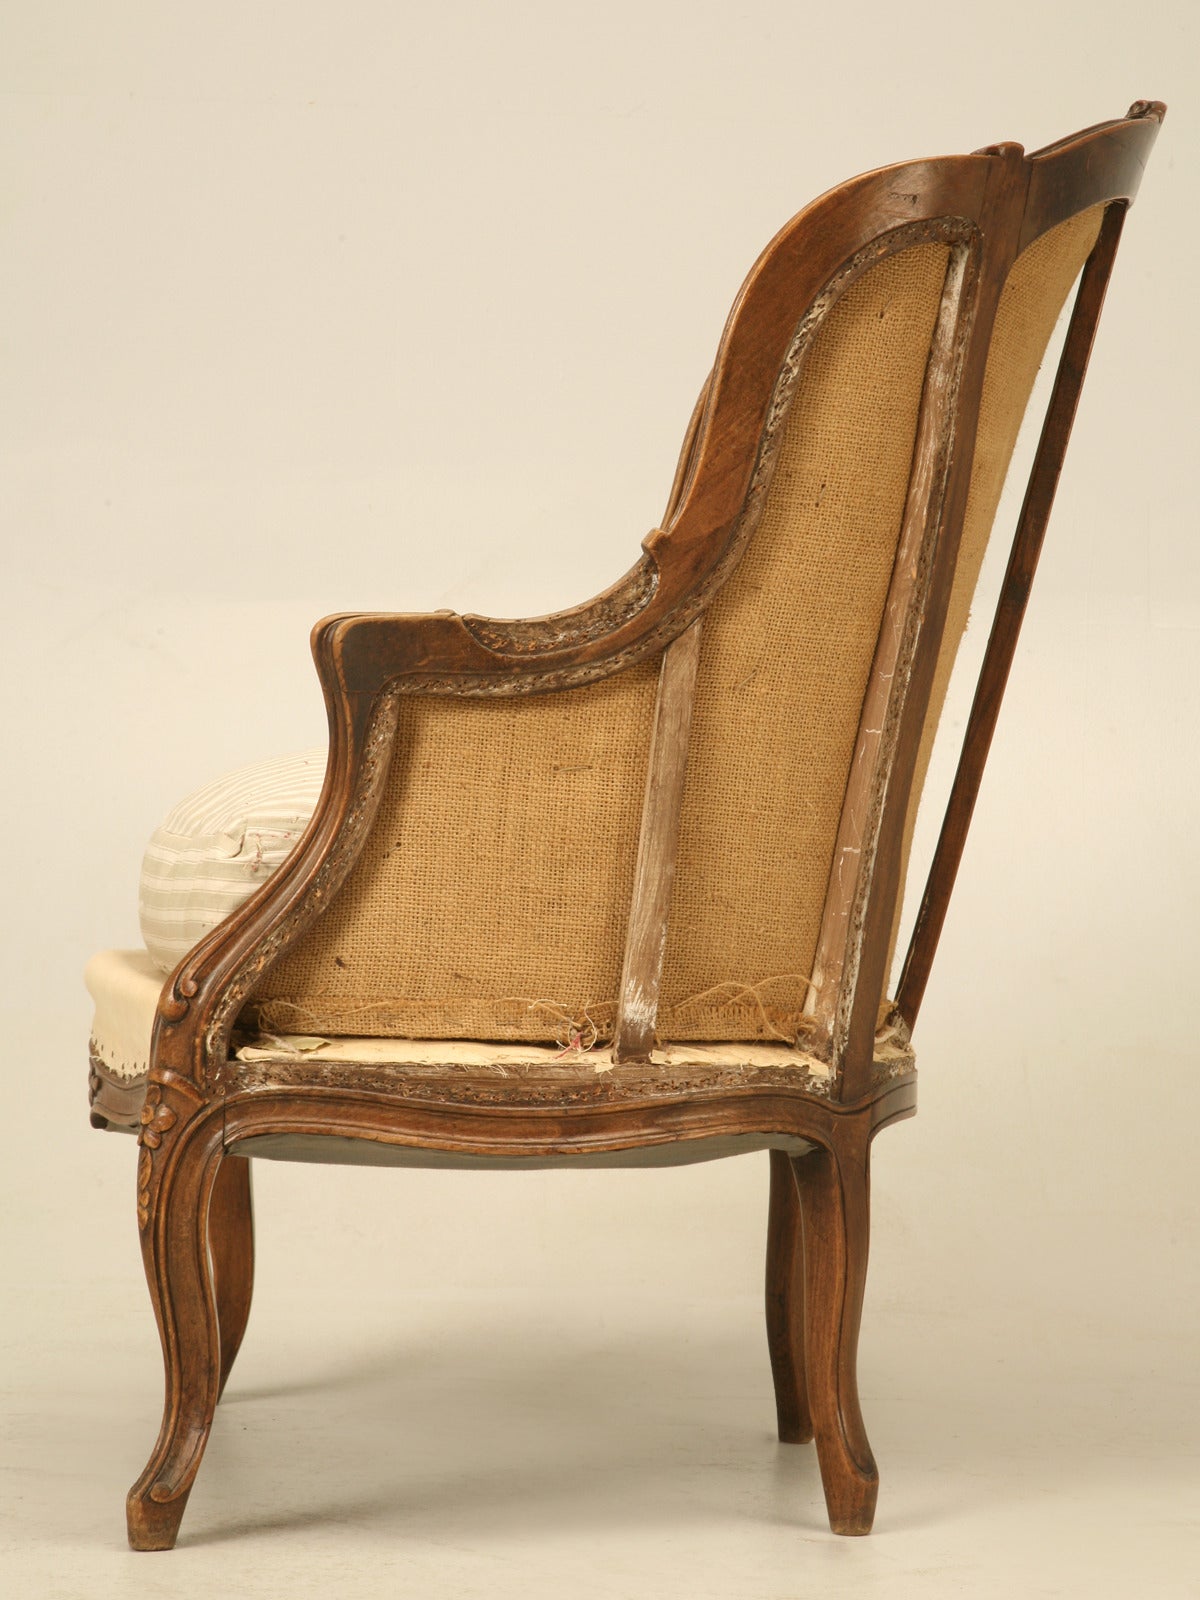 Antique French Hand-Carved Walnut Louis XV Style Chair, Down Cushion circa 1880s For Sale 2